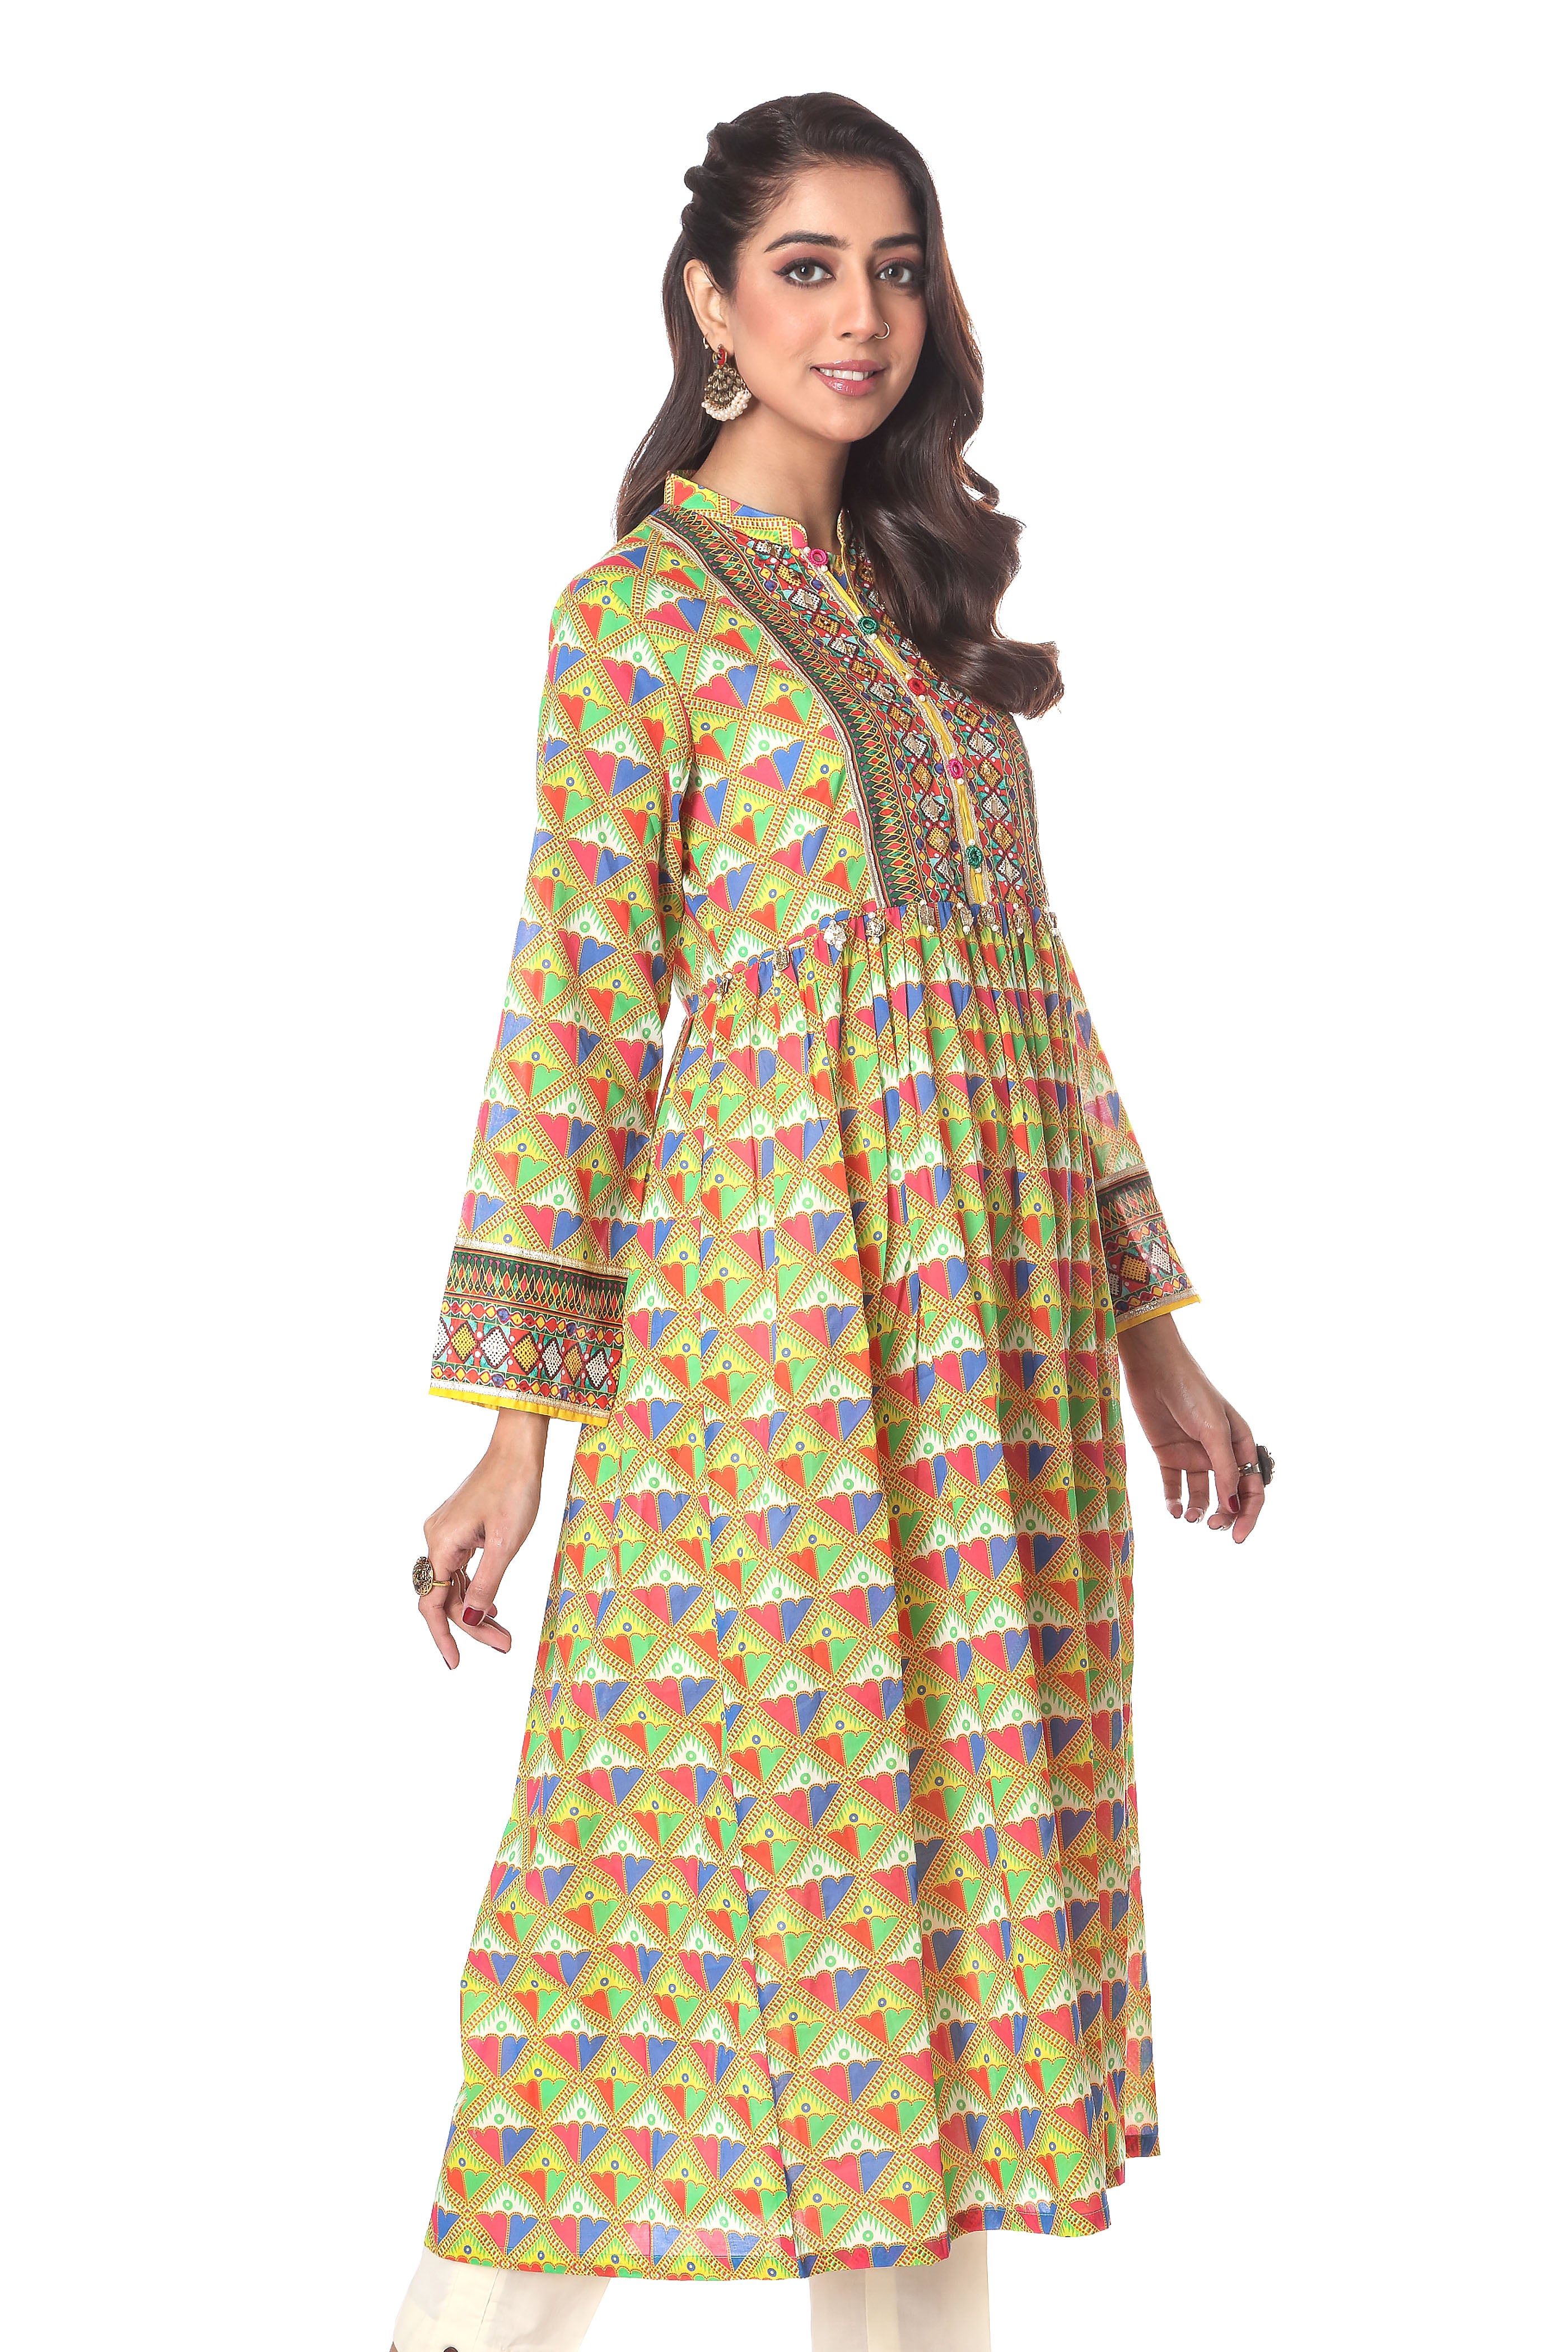 Discover Timeless Style: Chain Stitch 1 Frock in Multi Printed Lawn ...